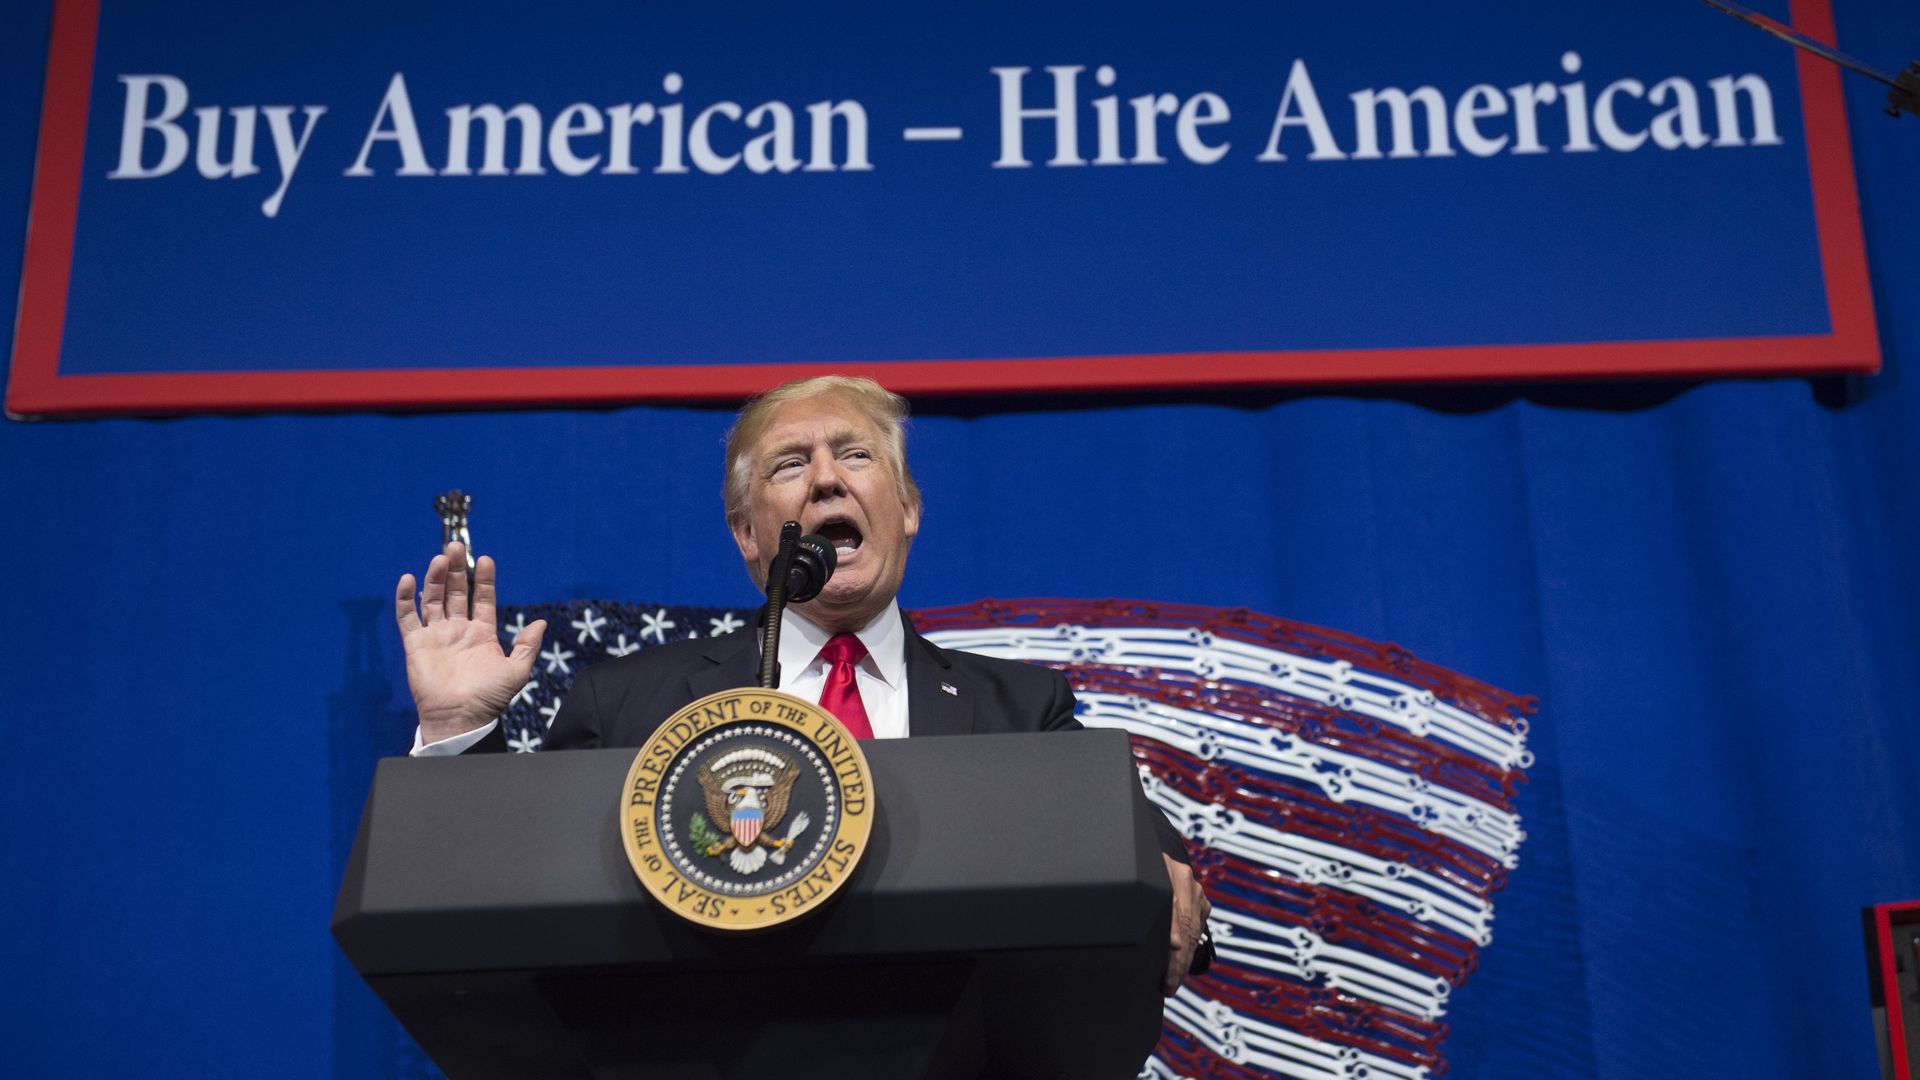 Donald Trump speaking at an event with a sign behind him that says "Buy American - Hire American"